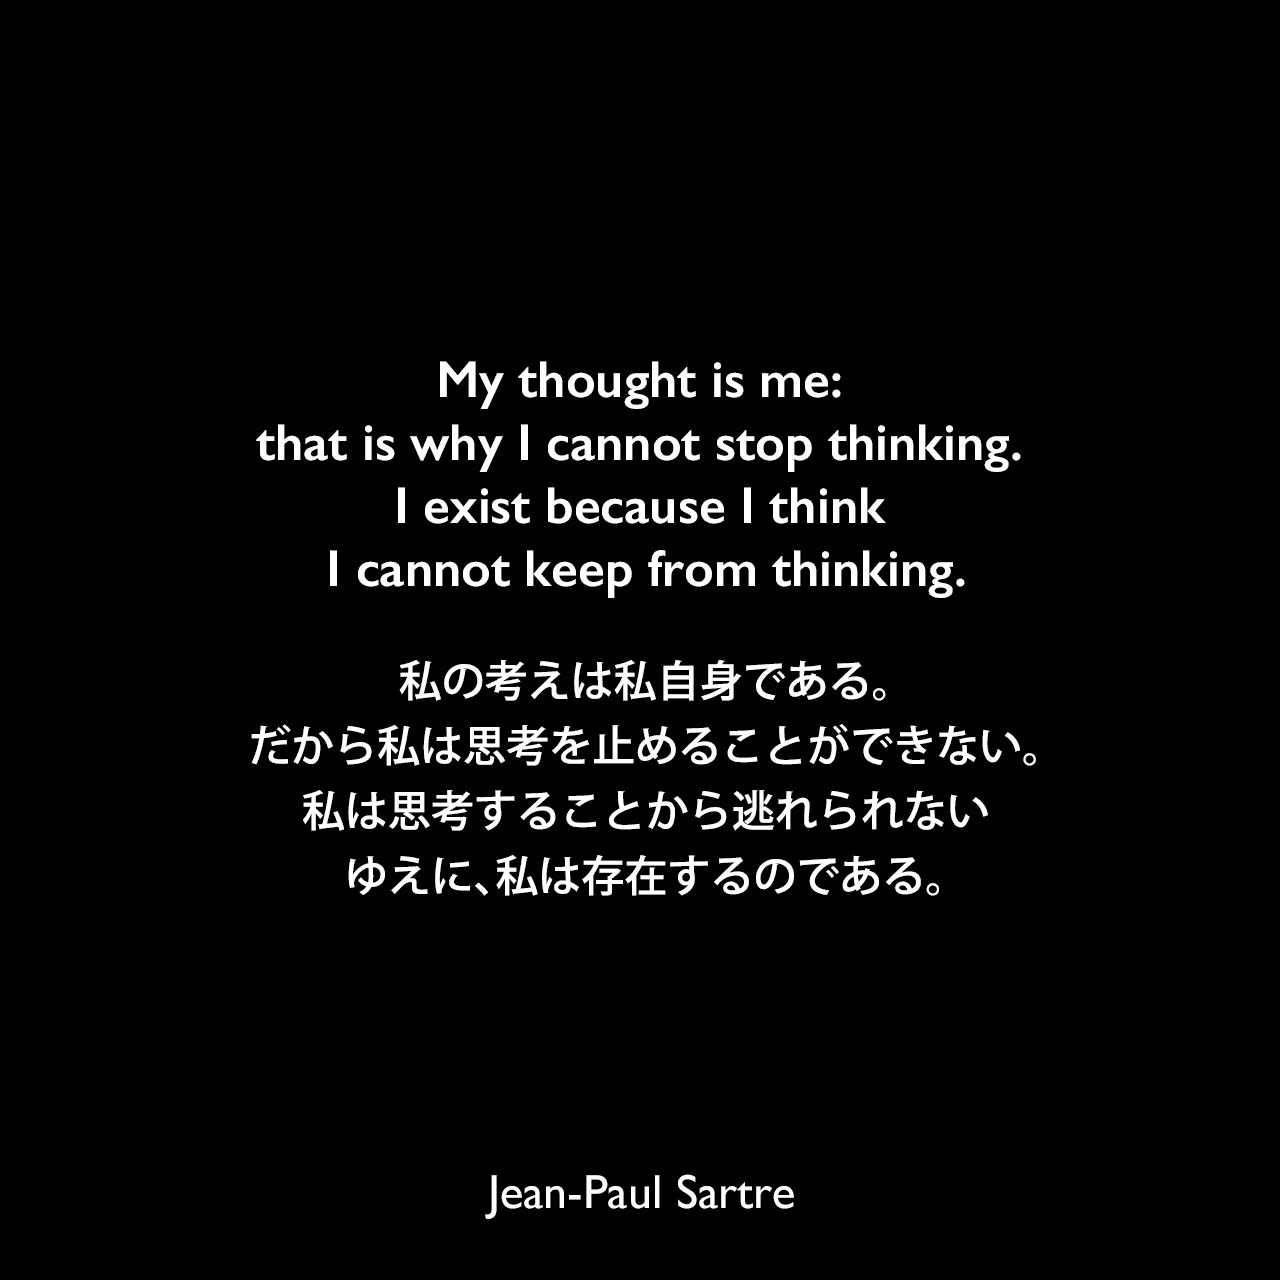 My thought is me: that is why I cannot stop thinking. I exist because I think I cannot keep from thinking.私の考えは私自身である。だから私は思考を止めることができない。私は思考することから逃れられない、ゆえに、私は存在するのである。Jean-Paul Sartre